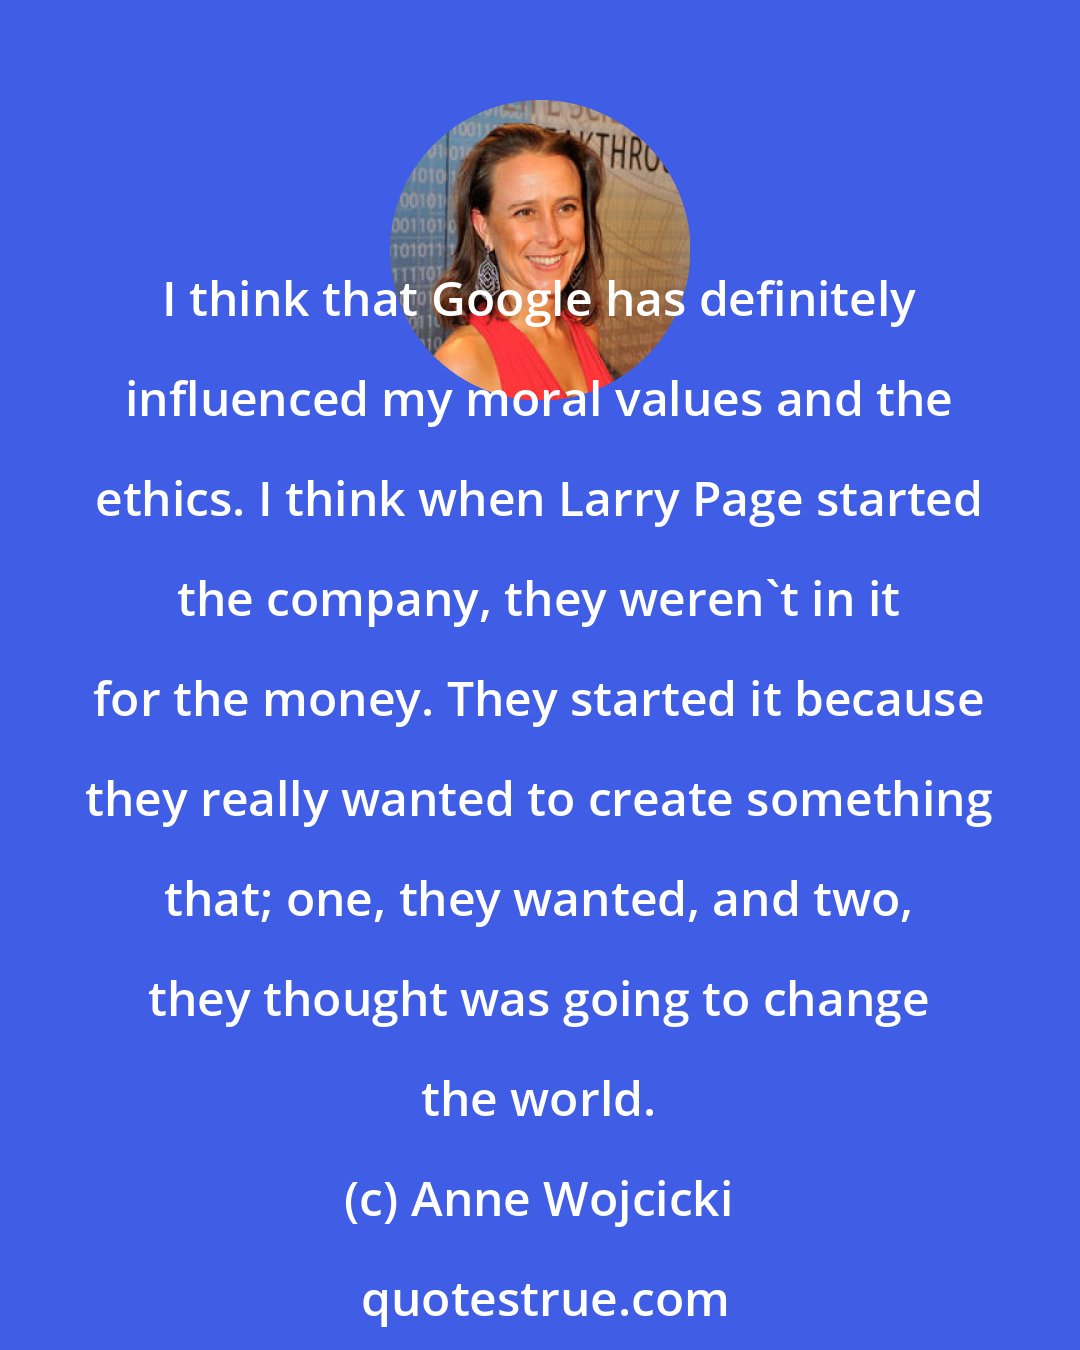 Anne Wojcicki: I think that Google has definitely influenced my moral values and the ethics. I think when Larry Page started the company, they weren't in it for the money. They started it because they really wanted to create something that; one, they wanted, and two, they thought was going to change the world.